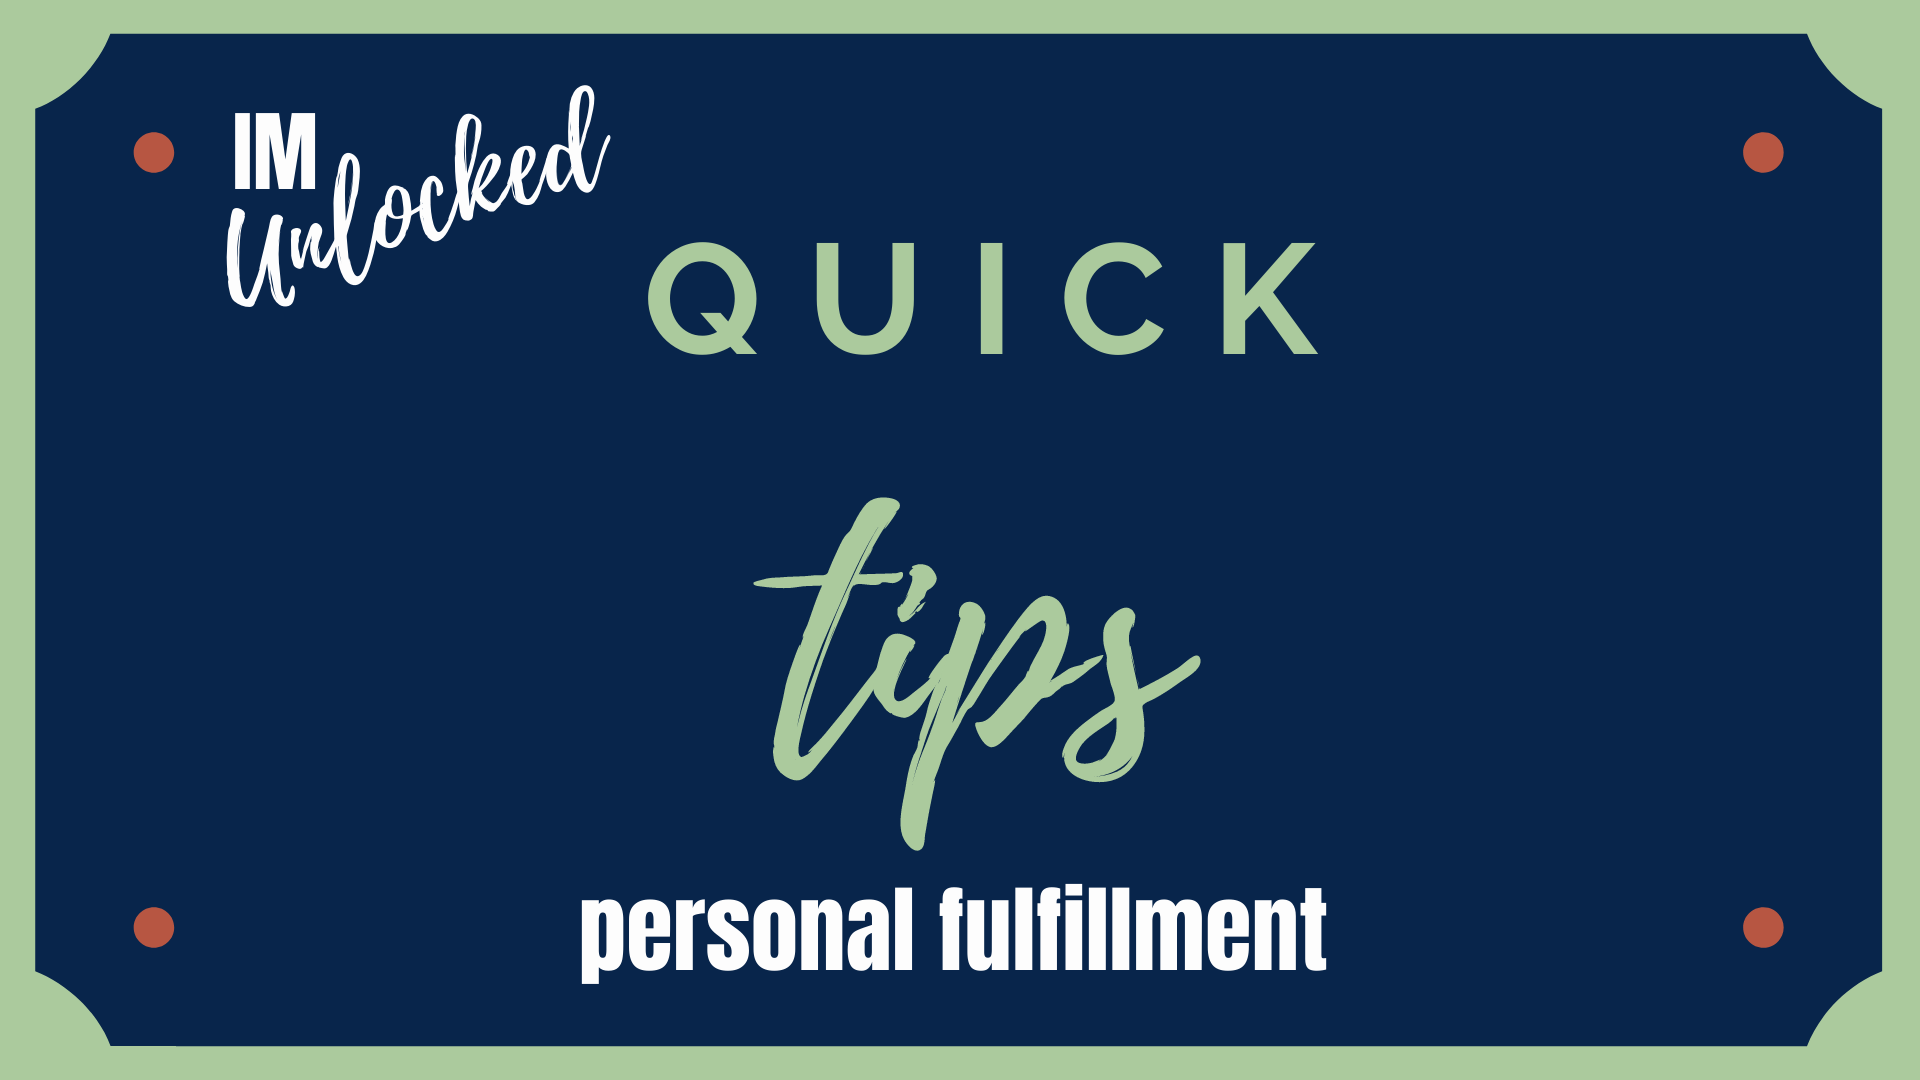 IMUnlocked Quick Tips for Personal Fulfillment